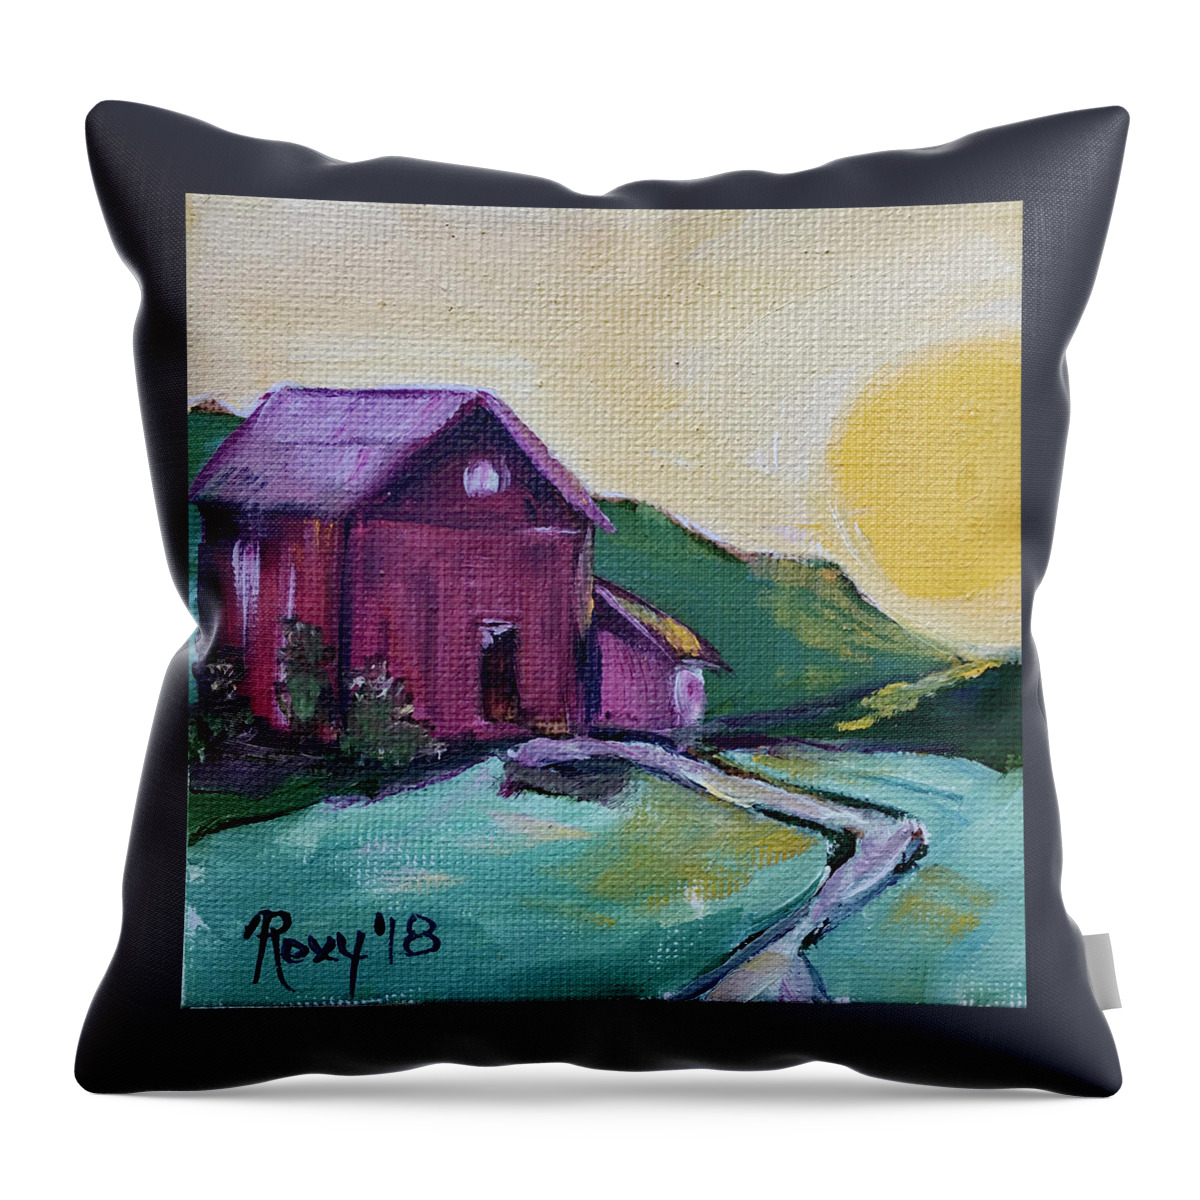 Countryside Throw Pillow featuring the painting Good Morning Countryside #1 by Roxy Rich